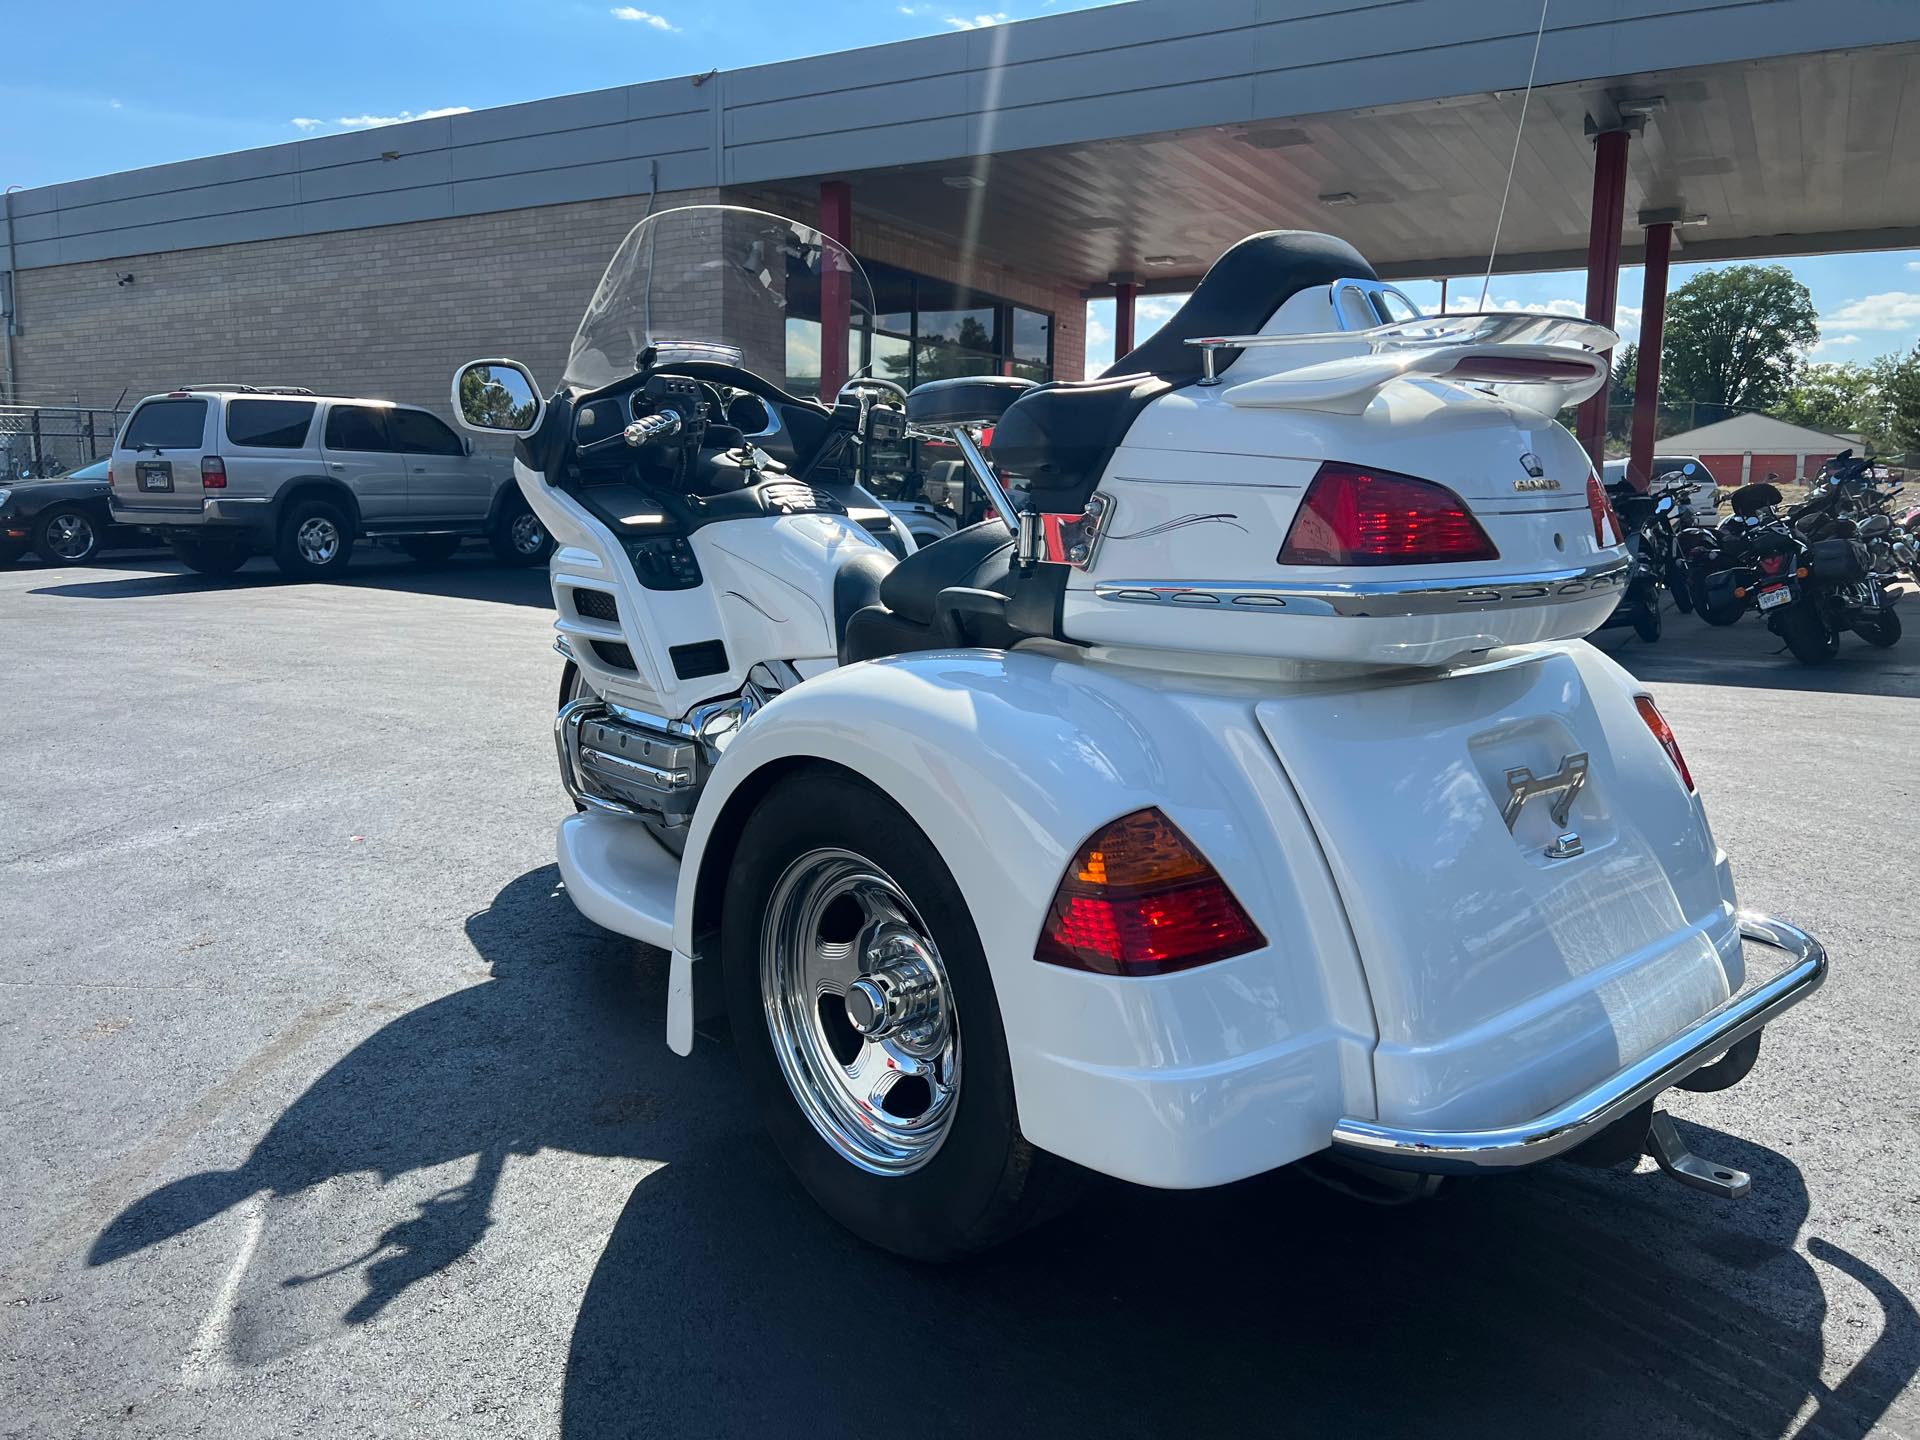 2004 Honda Gold Wing Base at Aces Motorcycles - Fort Collins